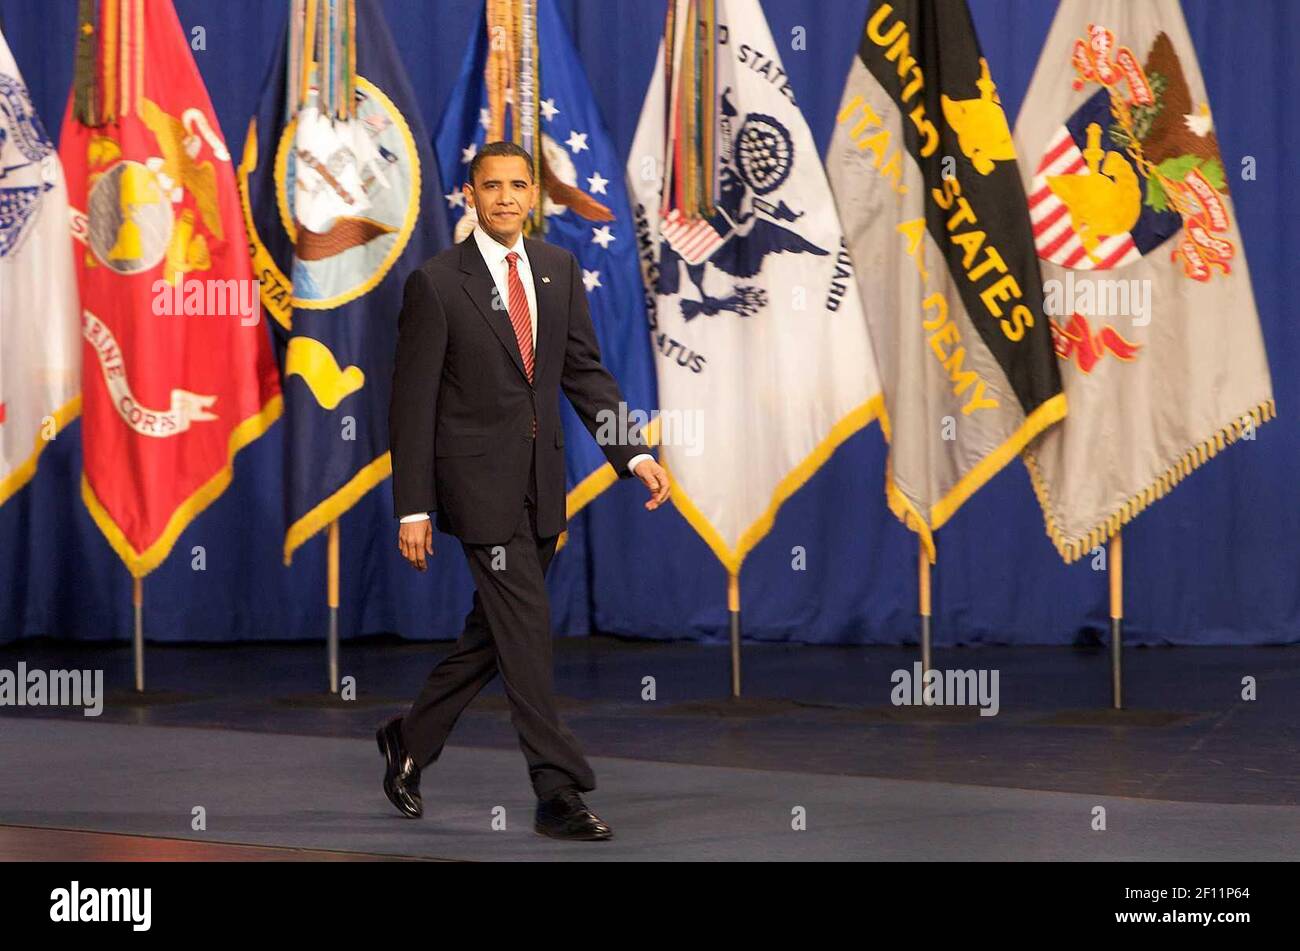 1 December 2009 - West Point, New York - President Obama walks to the lectern to present his strategy on Afghanistan to the nation and a live audience of about 4,200 cadets and guests at West Point's Eisenhower Hall Theatre. After the 35-minute speech, he took time to shake hands and pose for photos with many of the cadets. Photo Credit: Tommy Gilligan/DOD/Sipa Press/0912022222 Stock Photo